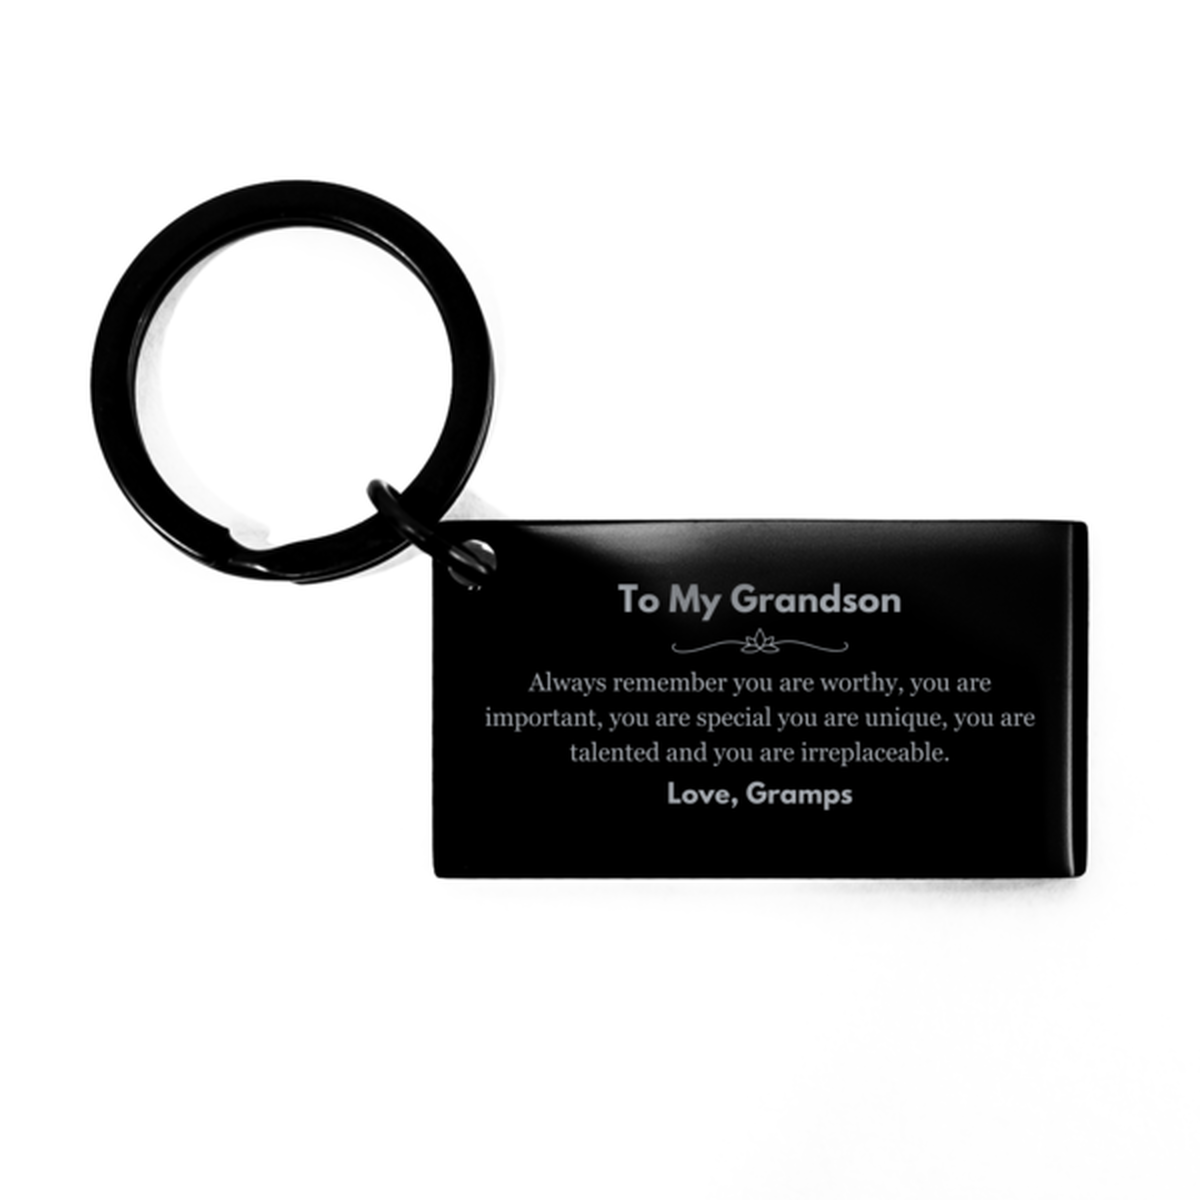 Grandson Birthday Gifts from Gramps, Inspirational Keychain for Grandson Christmas Graduation Gifts for Grandson Always remember you are worthy, you are important. Love, Gramps